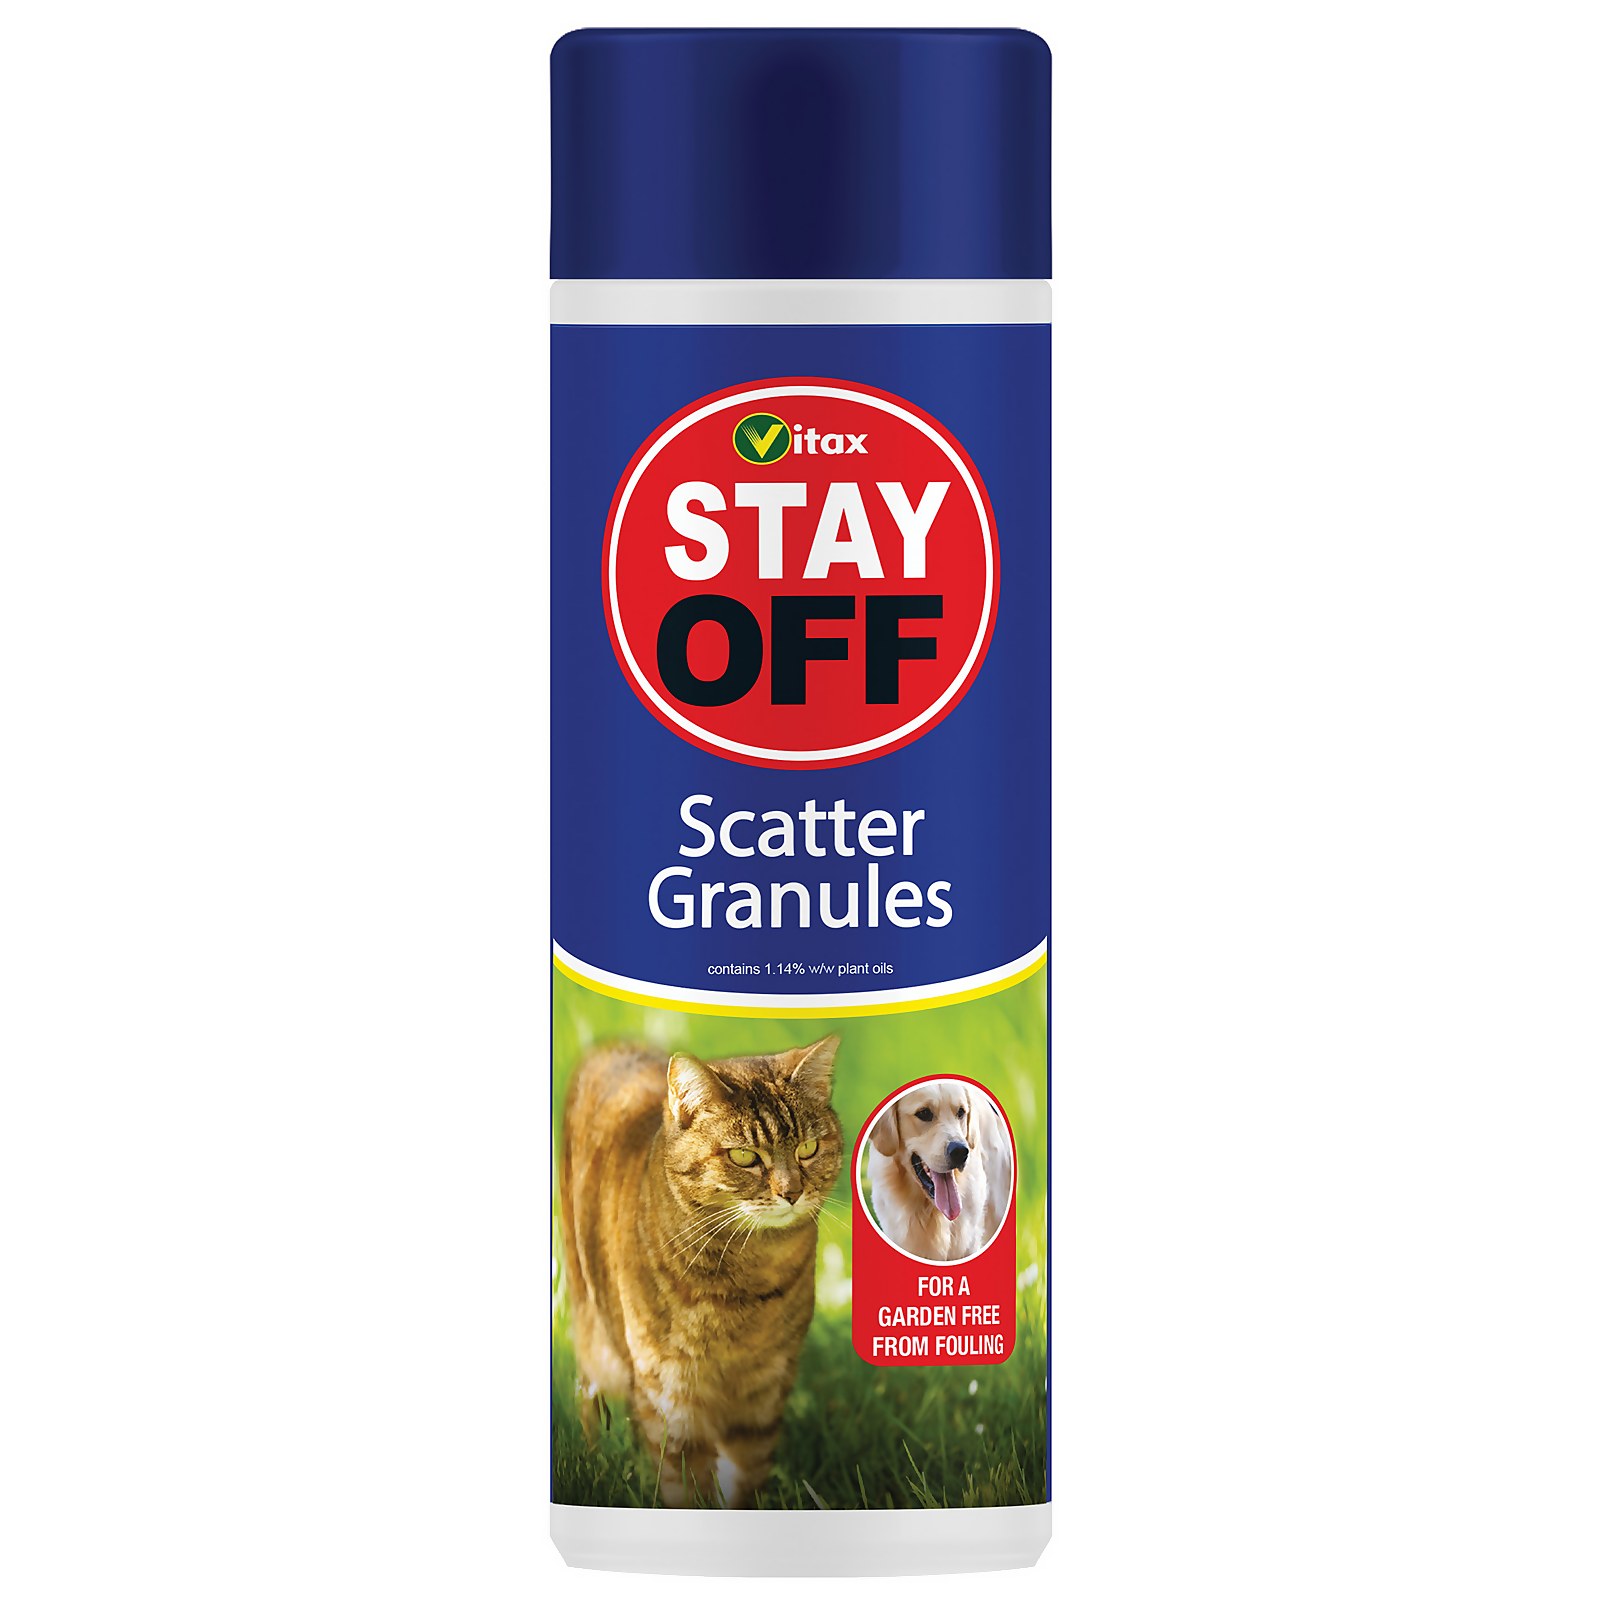 Photo of Vitax Stay Off Animal Repellent Scatter Granules - 600g